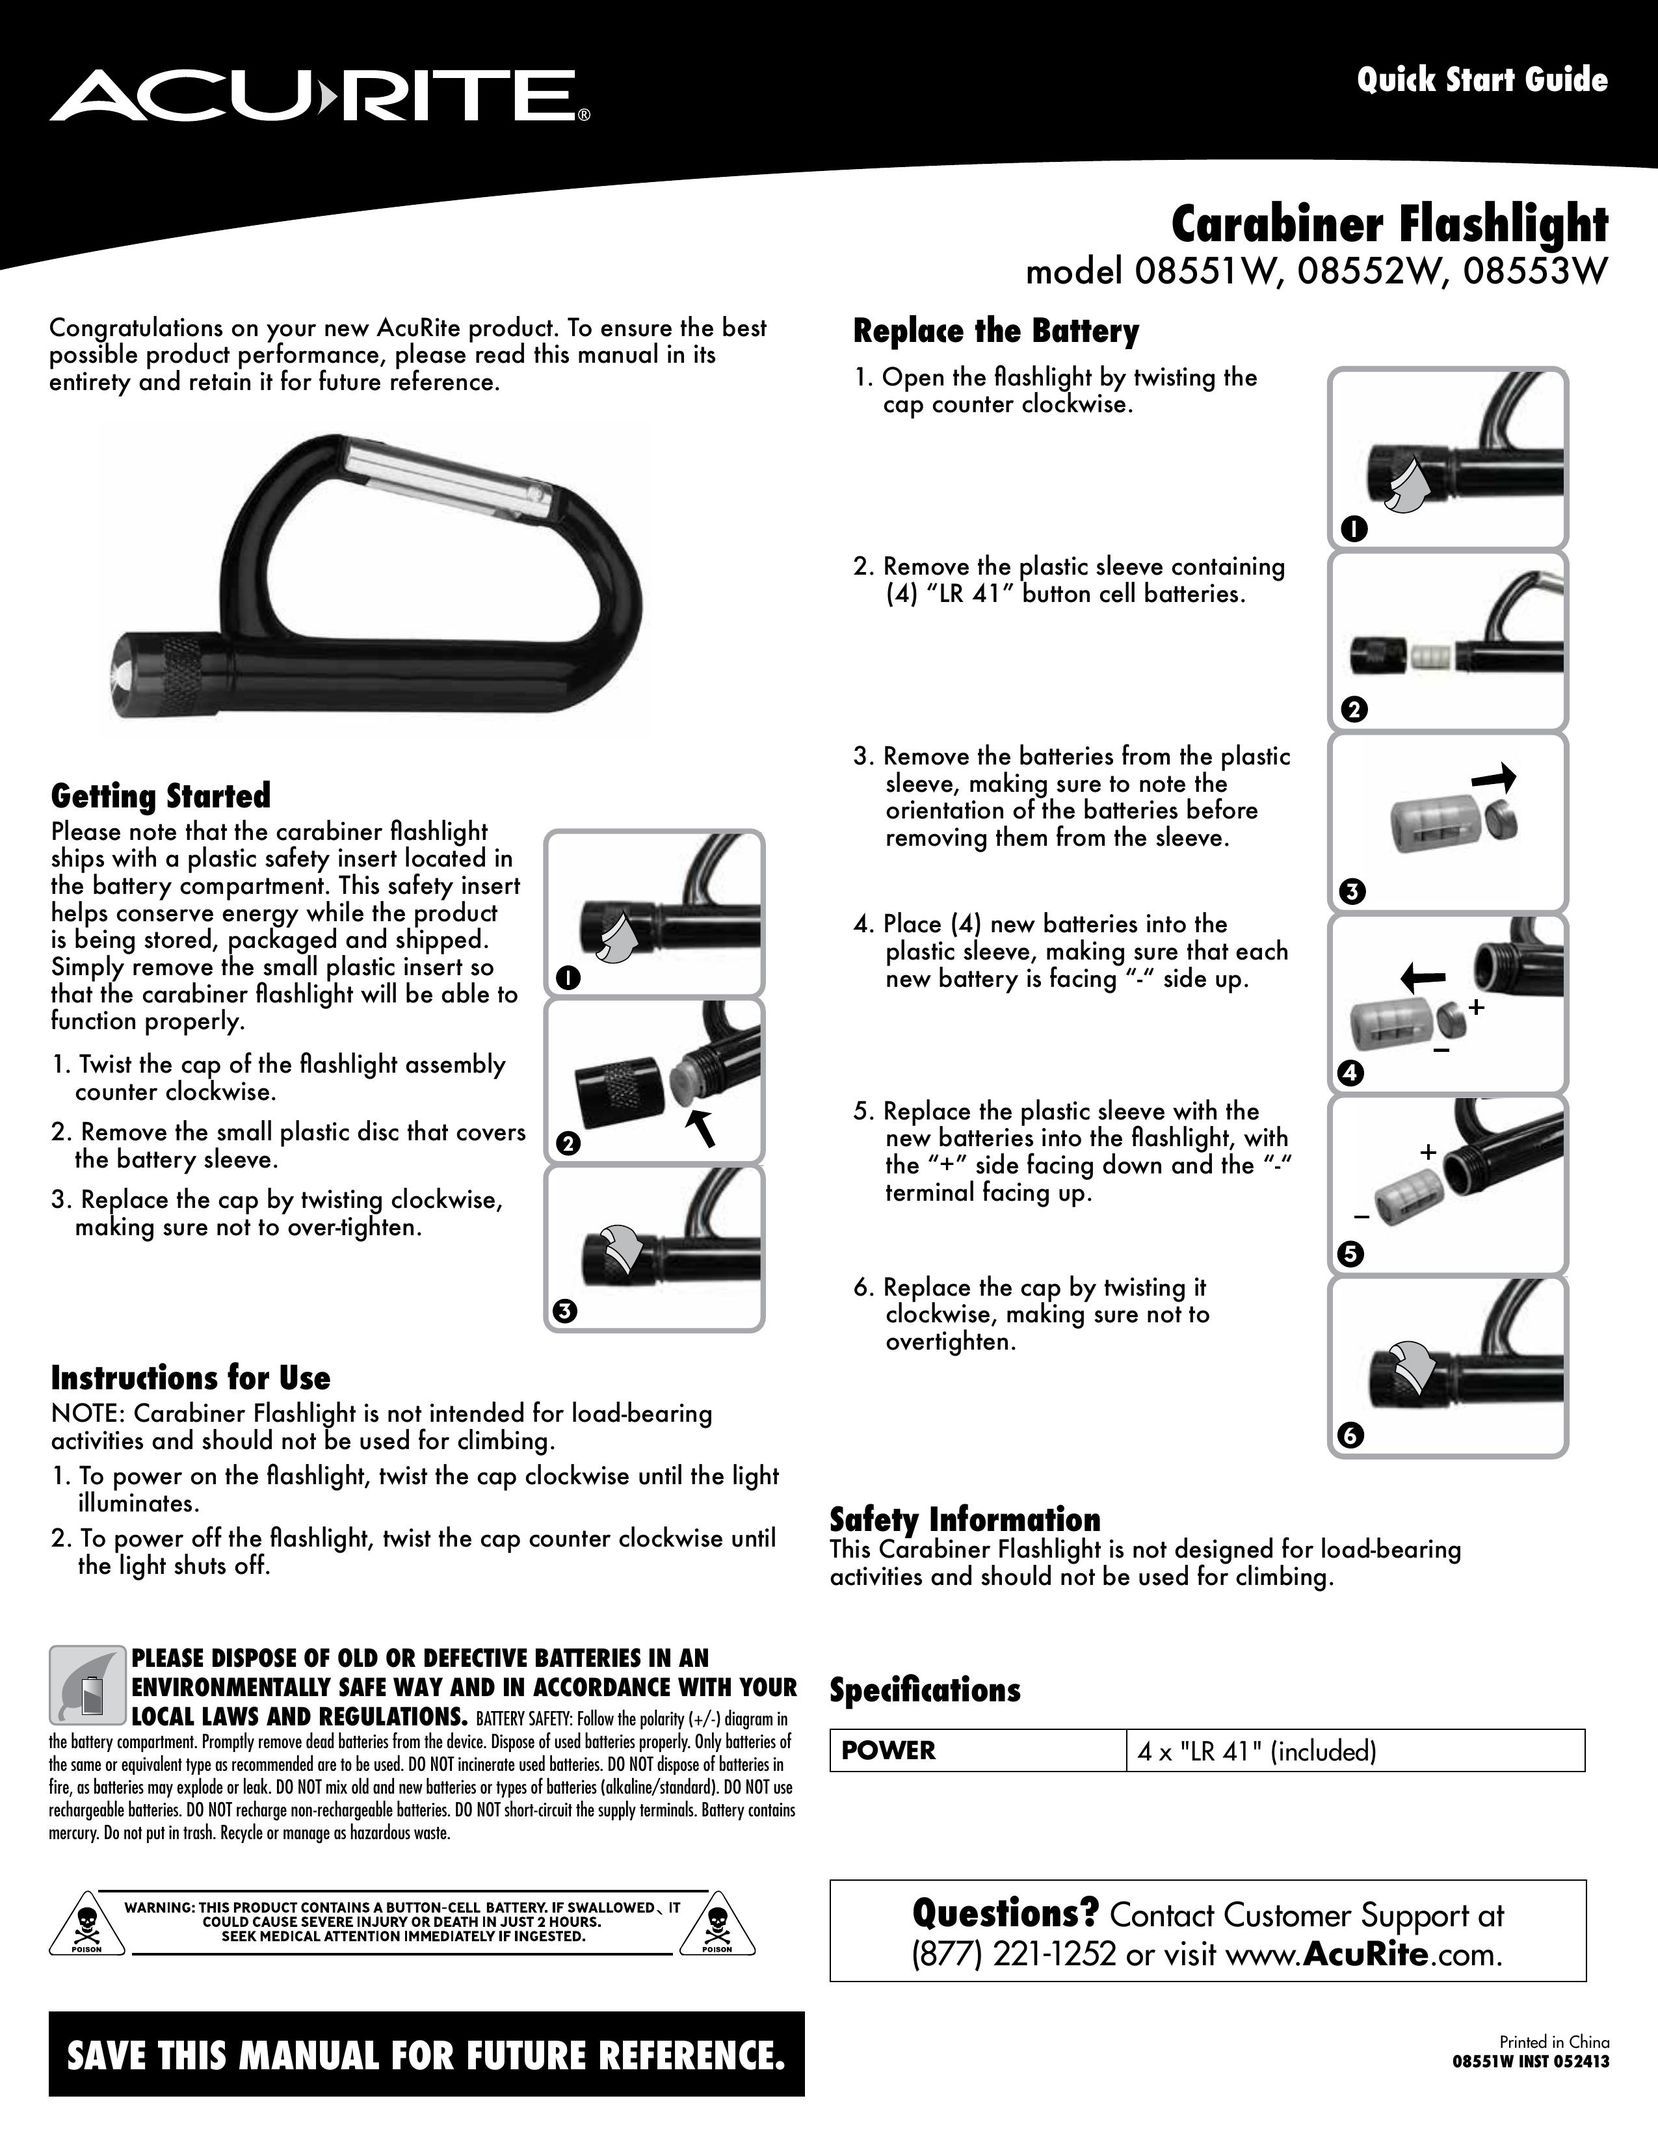 Acu-Rite 08552W Home Safety Product User Manual